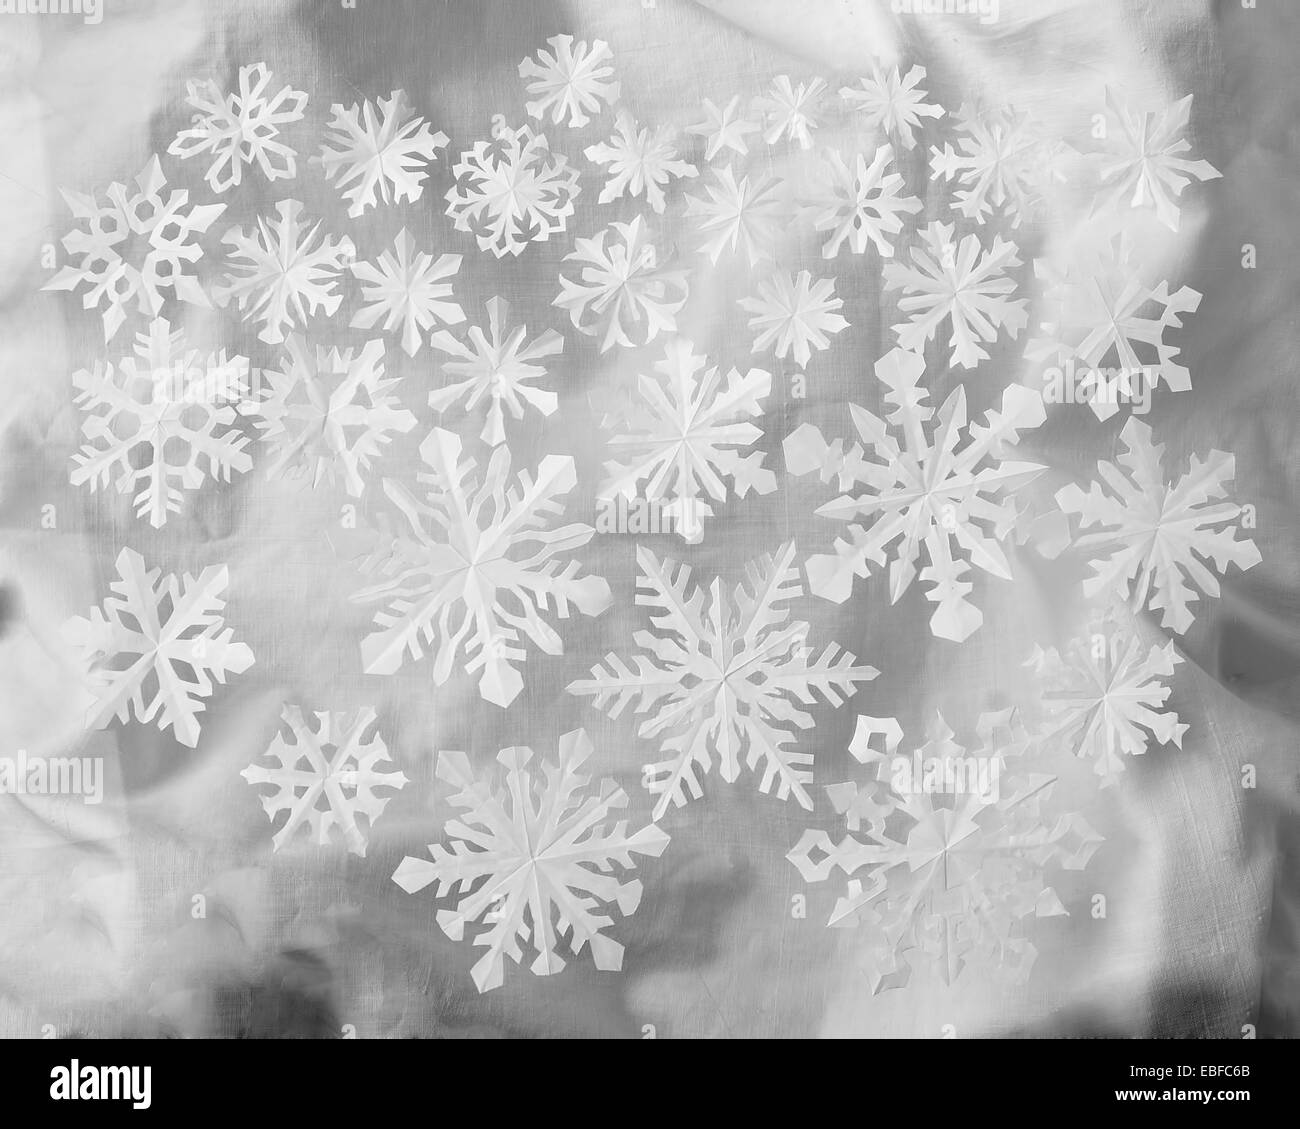 Paper snowflakes on bright cloth background Stock Photo